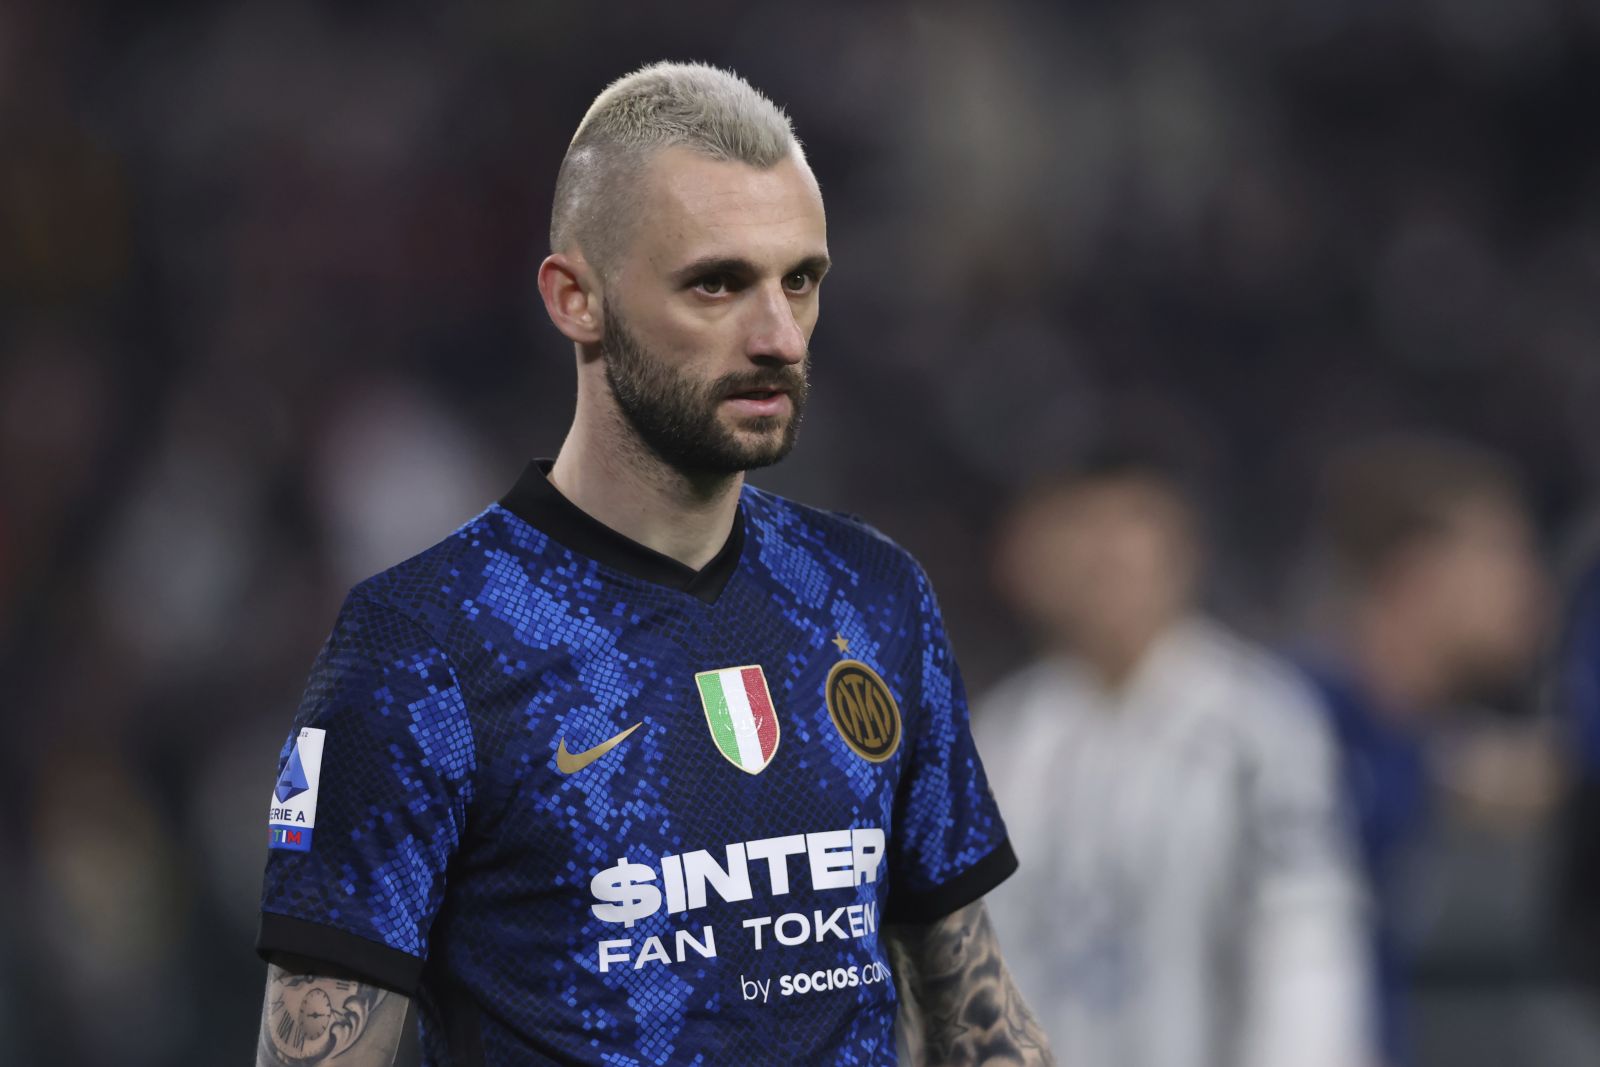 April 3, 2022, Turin, United Kingdom: Turin, Italy, 3rd April 2022. Marcelo Brozovic of FC Internazionale looks on during the Serie A match at Allianz Stadium, Turin. Picture credit should read: Jonathan Moscrop / Sportimage(Credit Image: (Cal Sport Media via AP Images)